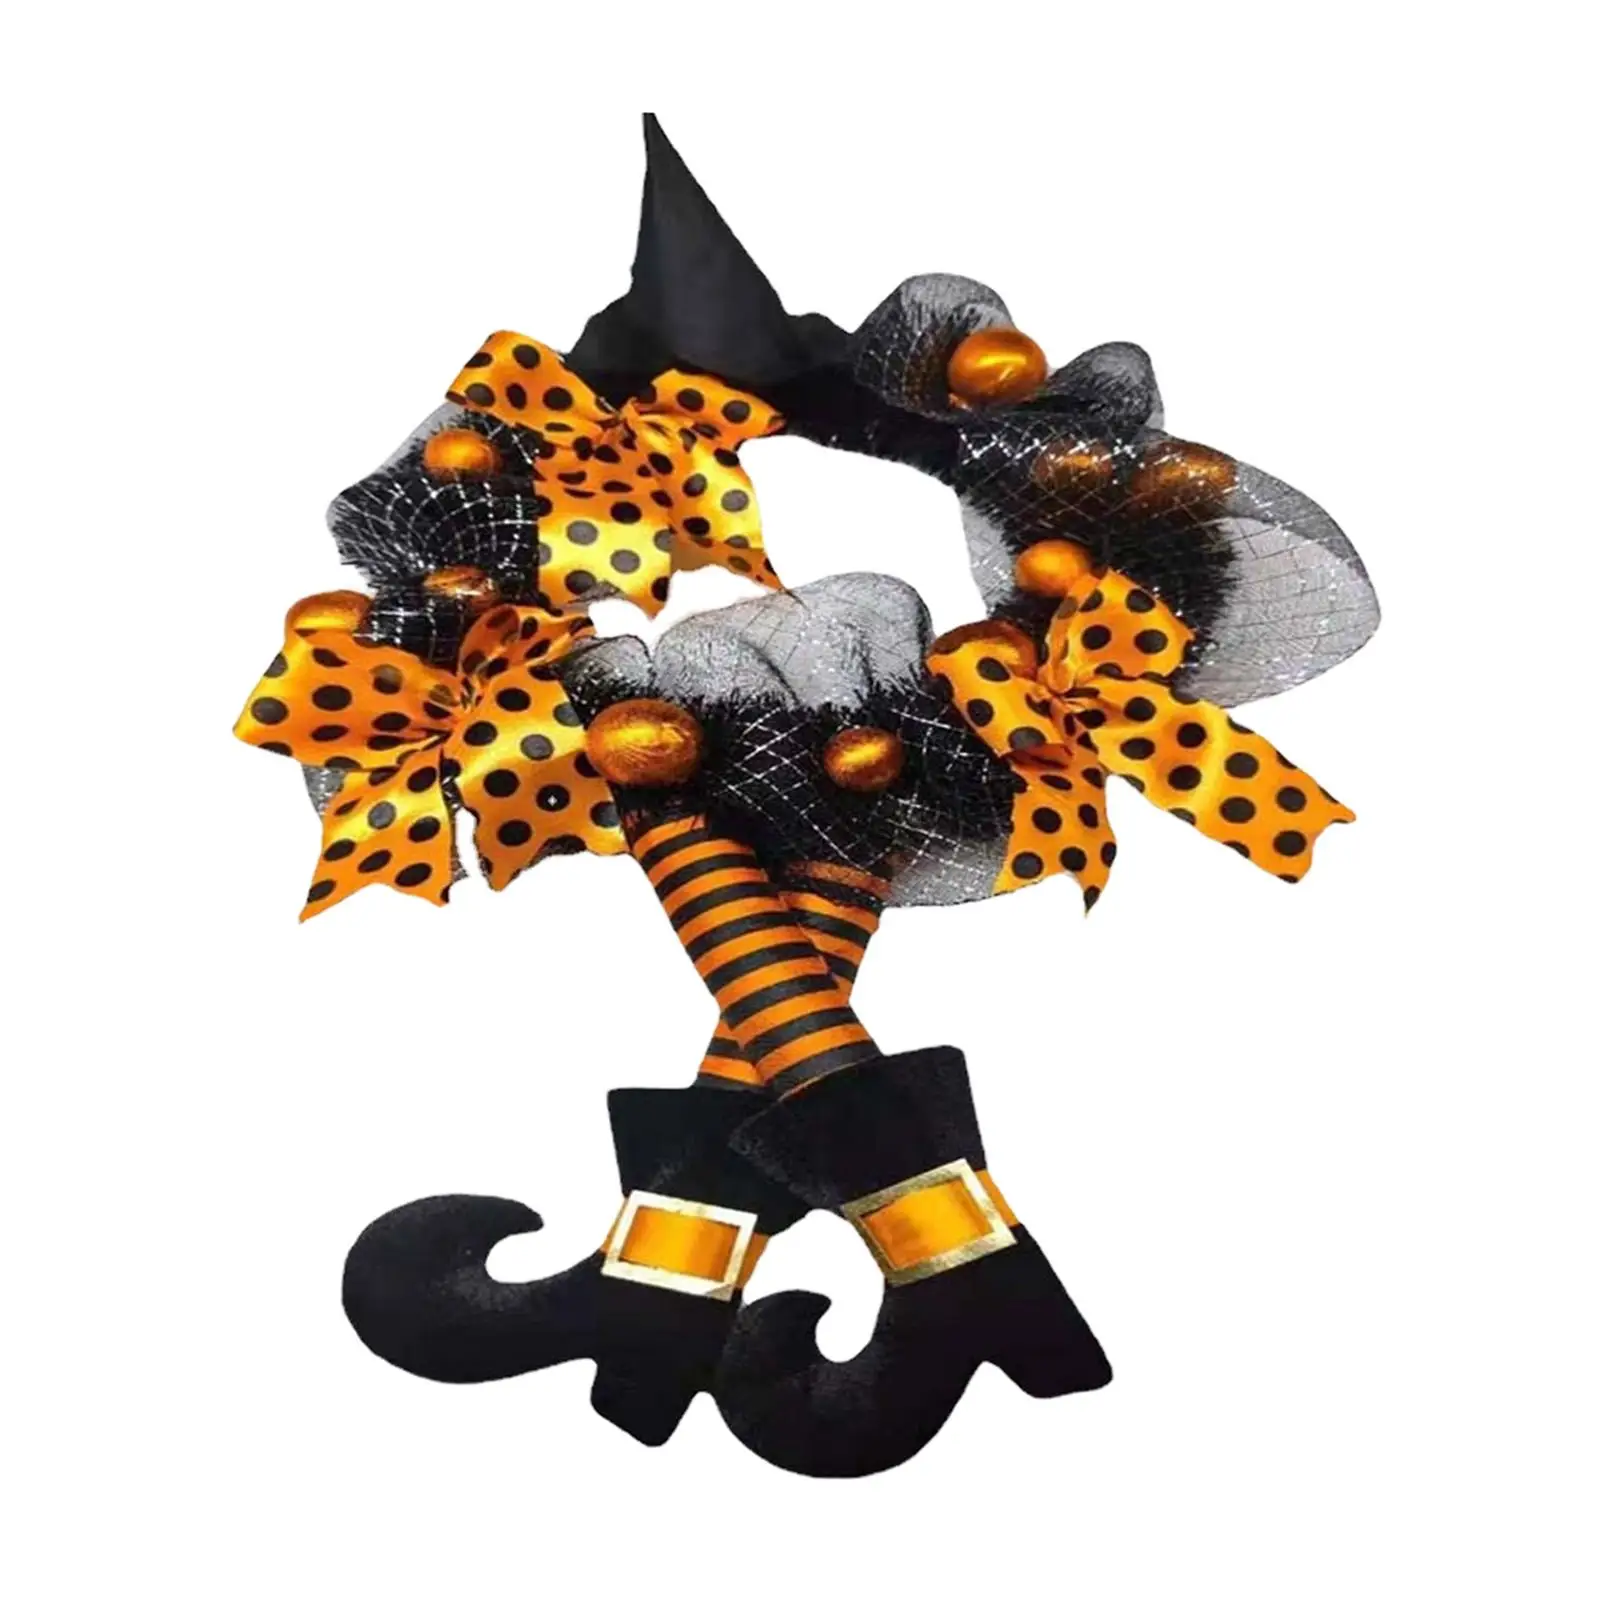 Happy Halloween Wreath with Ribbon Ornaments for Front Door Decorative Wreath Witch Wreath for Door Outdoor Holiday Mantle Decor